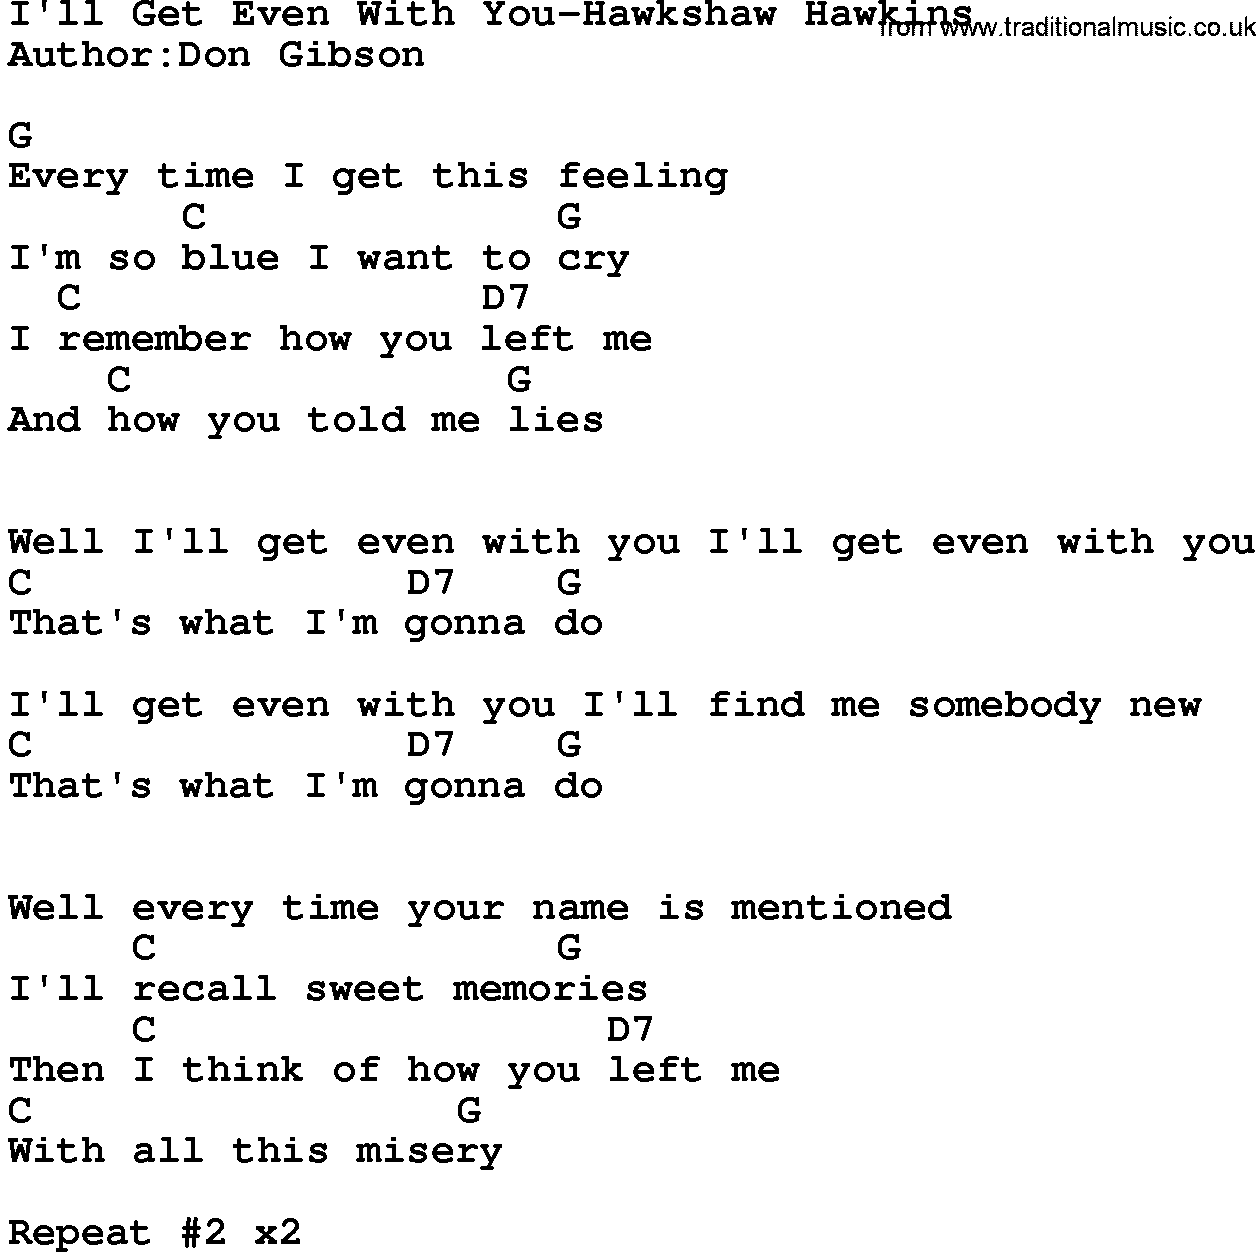 Country music song: I'll Get Even With You-Hawkshaw Hawkins lyrics and chords